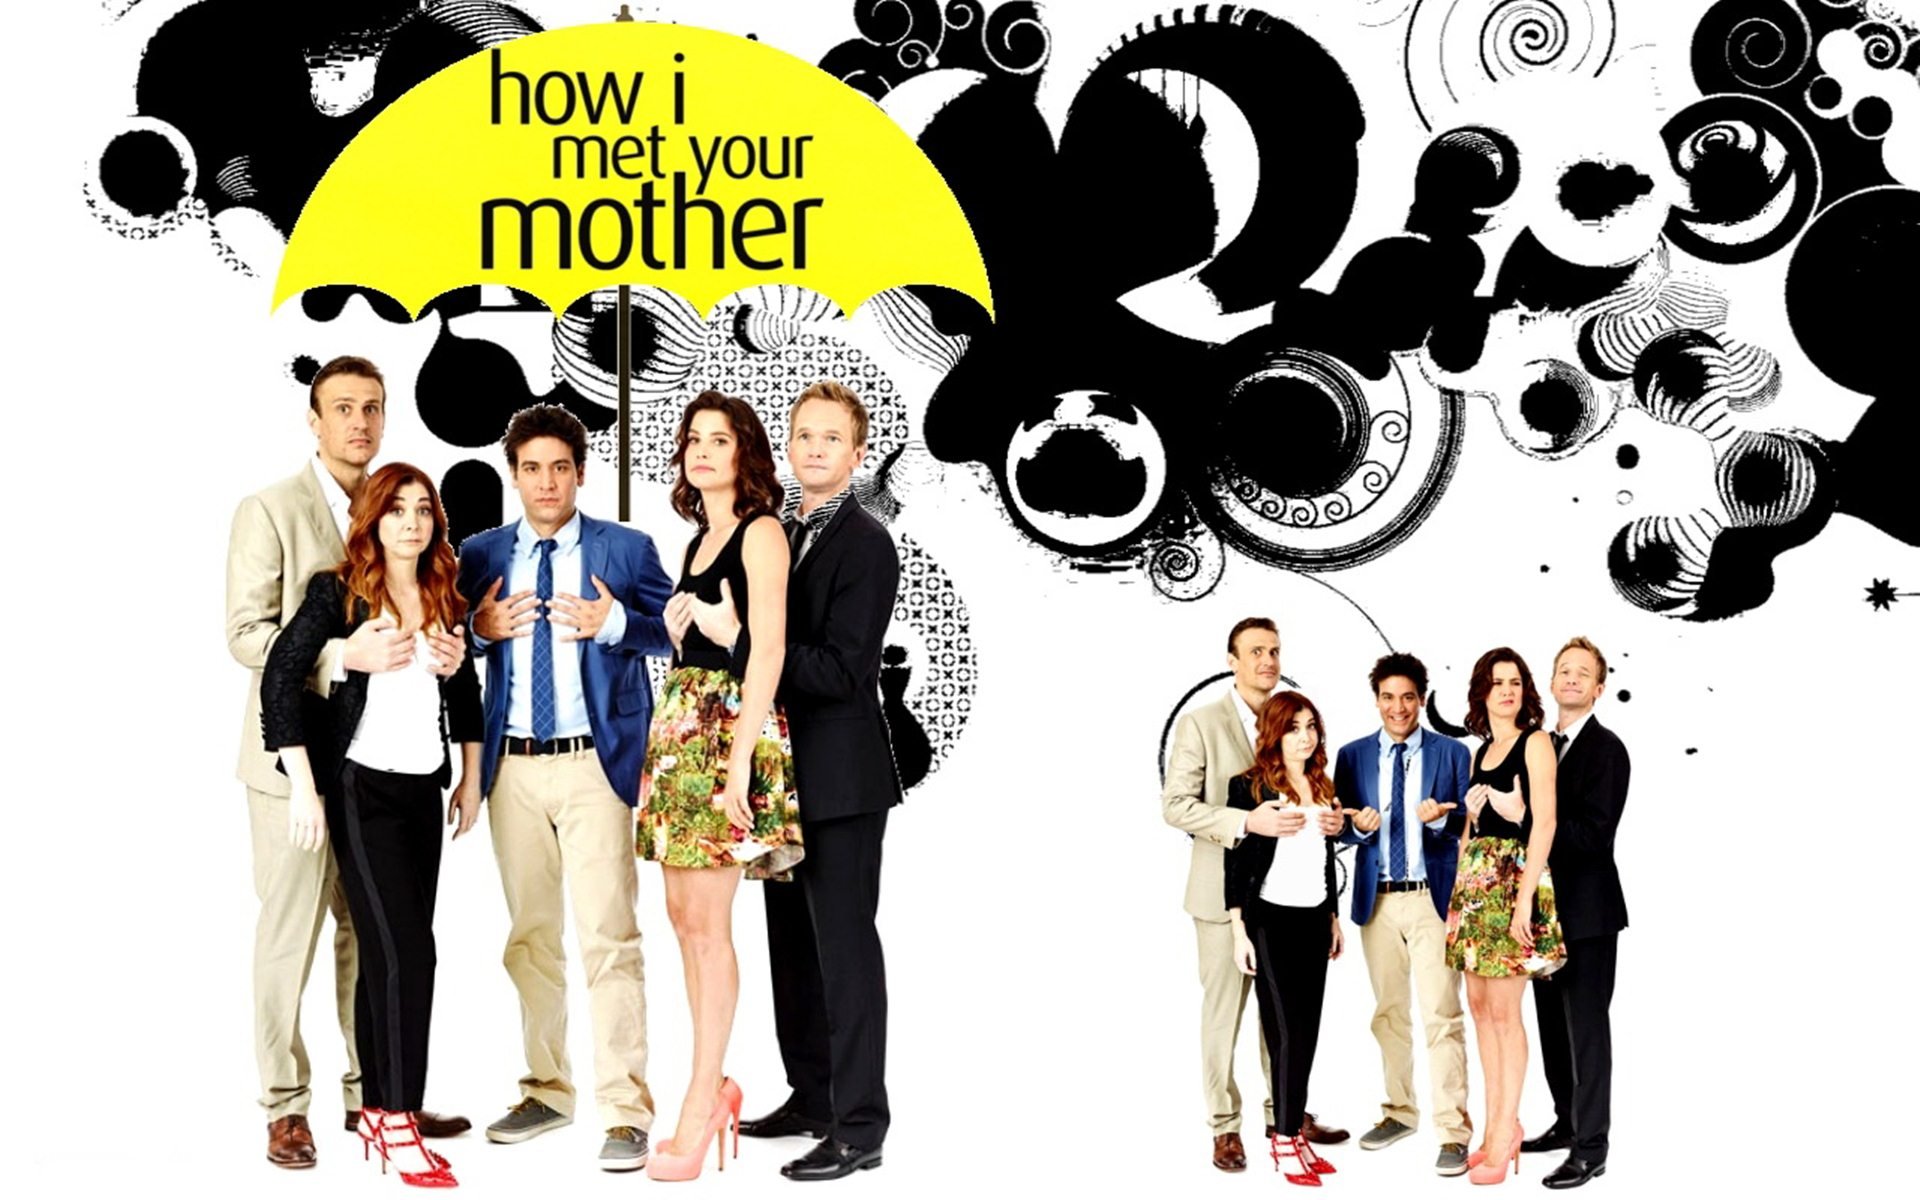 how i met your mother, Comedy, Sitcom, Series, Television, How, Met, Mother,  4 Wallpaper